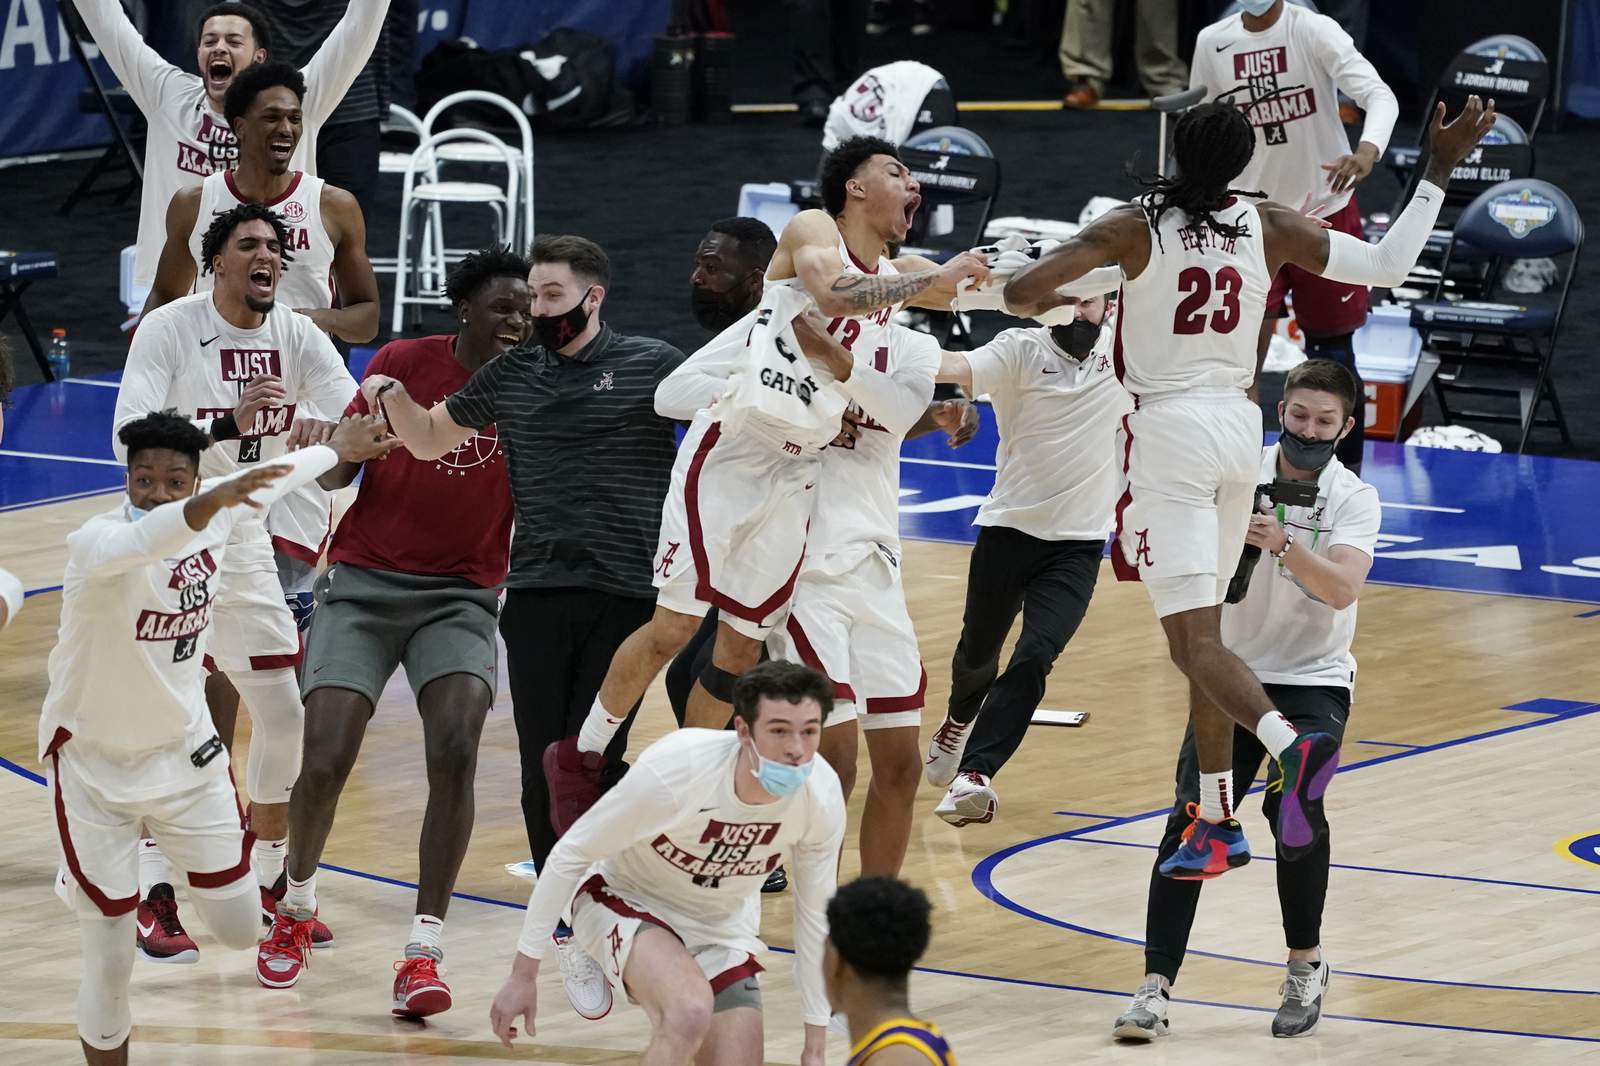 No. 6 Alabama adds another SEC title, edges LSU at tourney